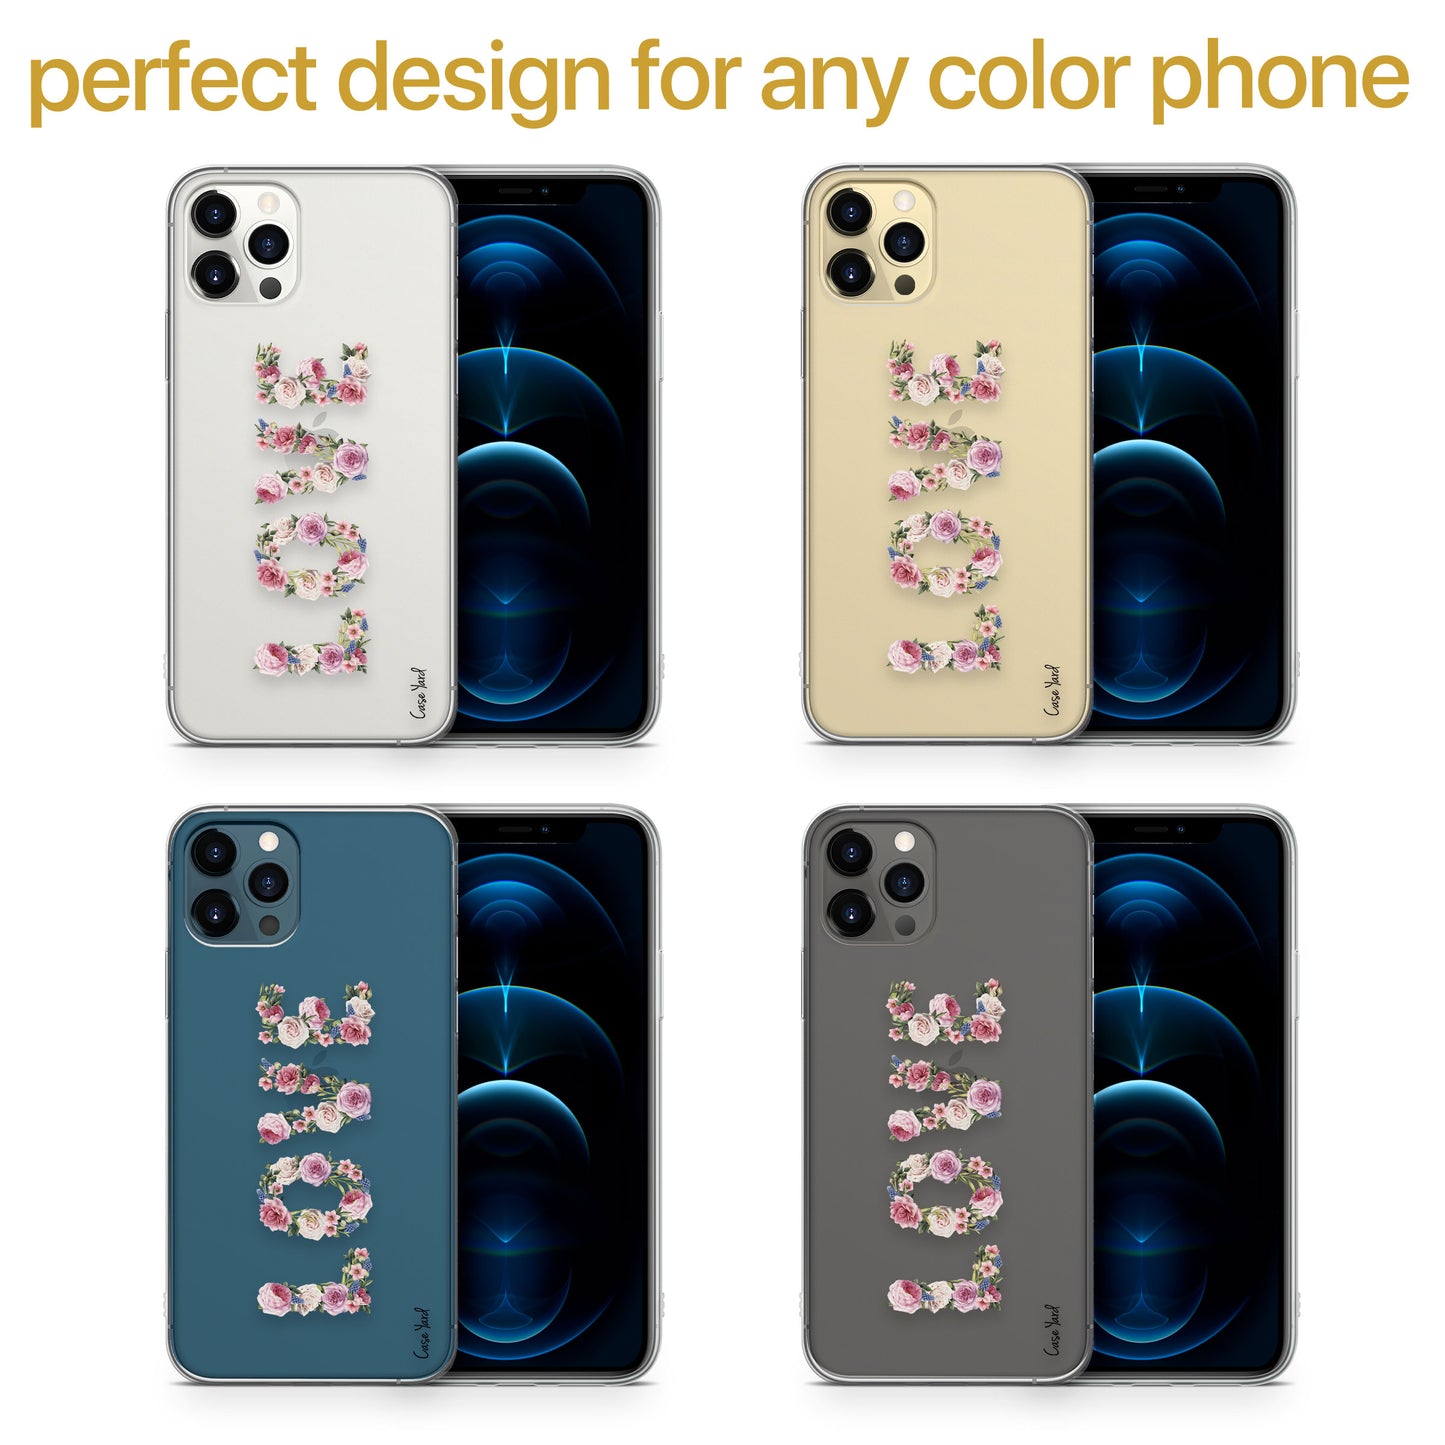 TPU Clear case with (Love Flower) Design for iPhone & Samsung Phones